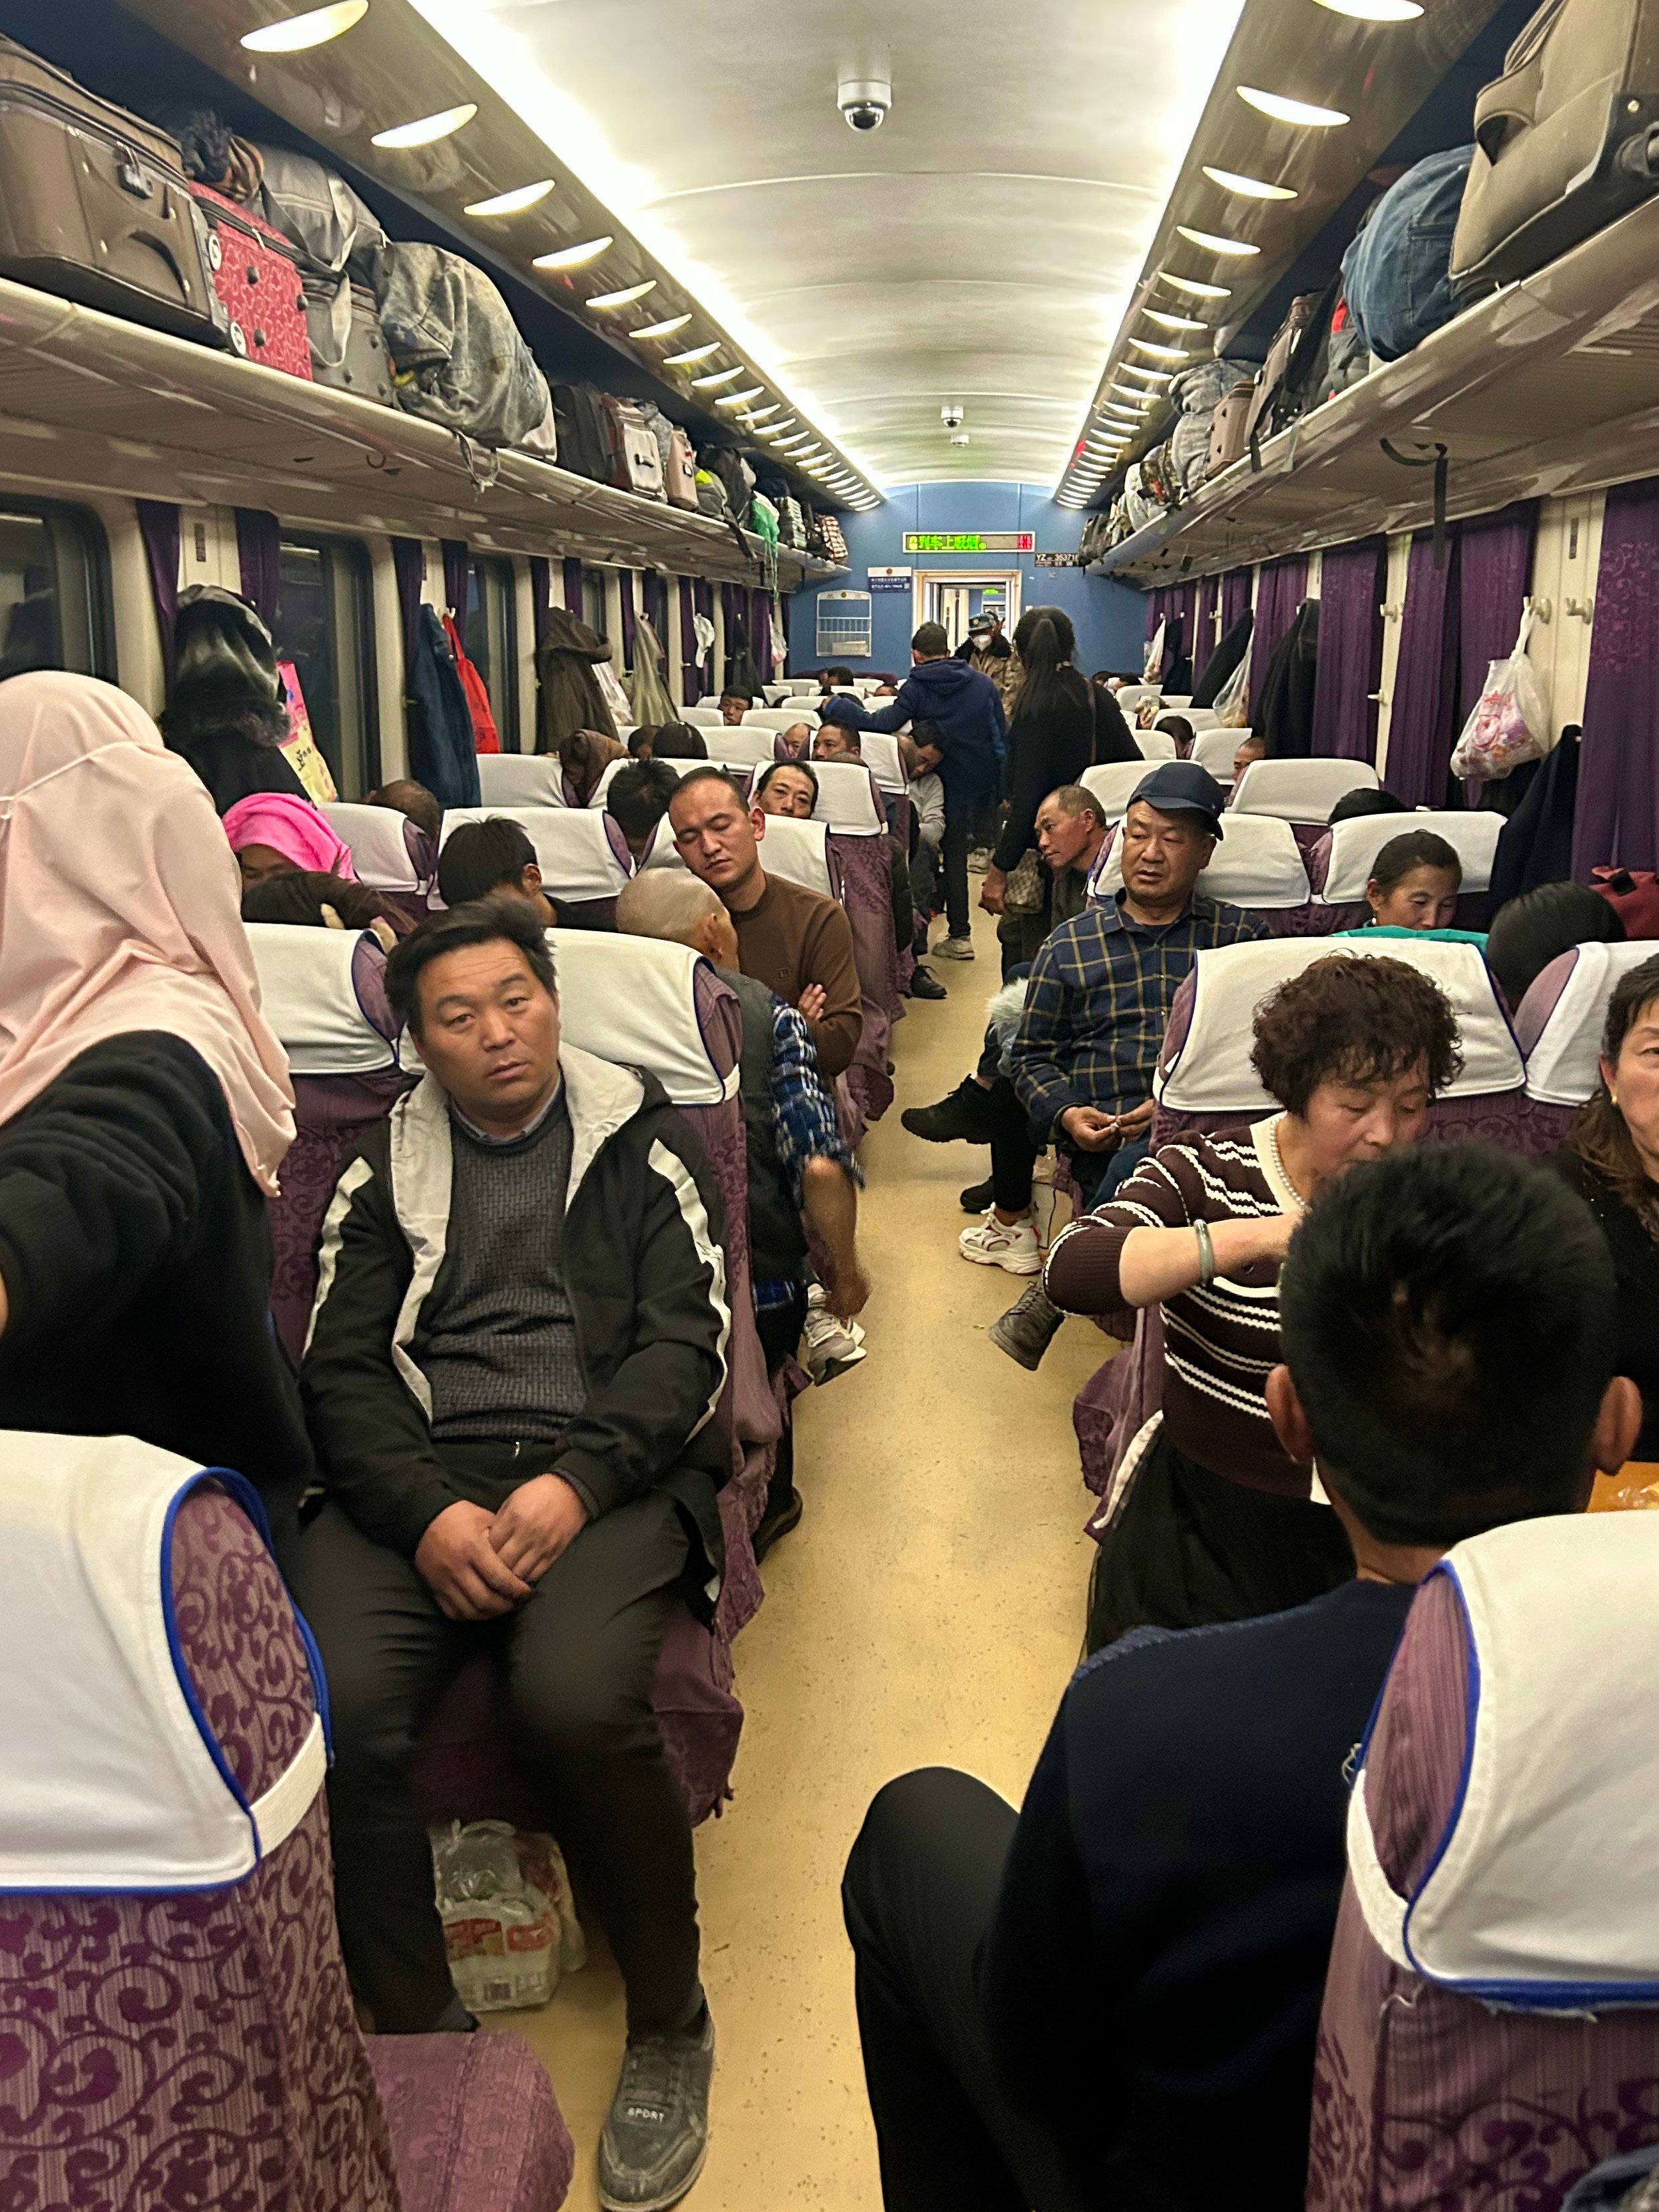 Passengers on a Chinese overnight train travelling from Lhasa, in Tibet, to Chengdu, in Sichuan province. Photo: Ian Neubauer